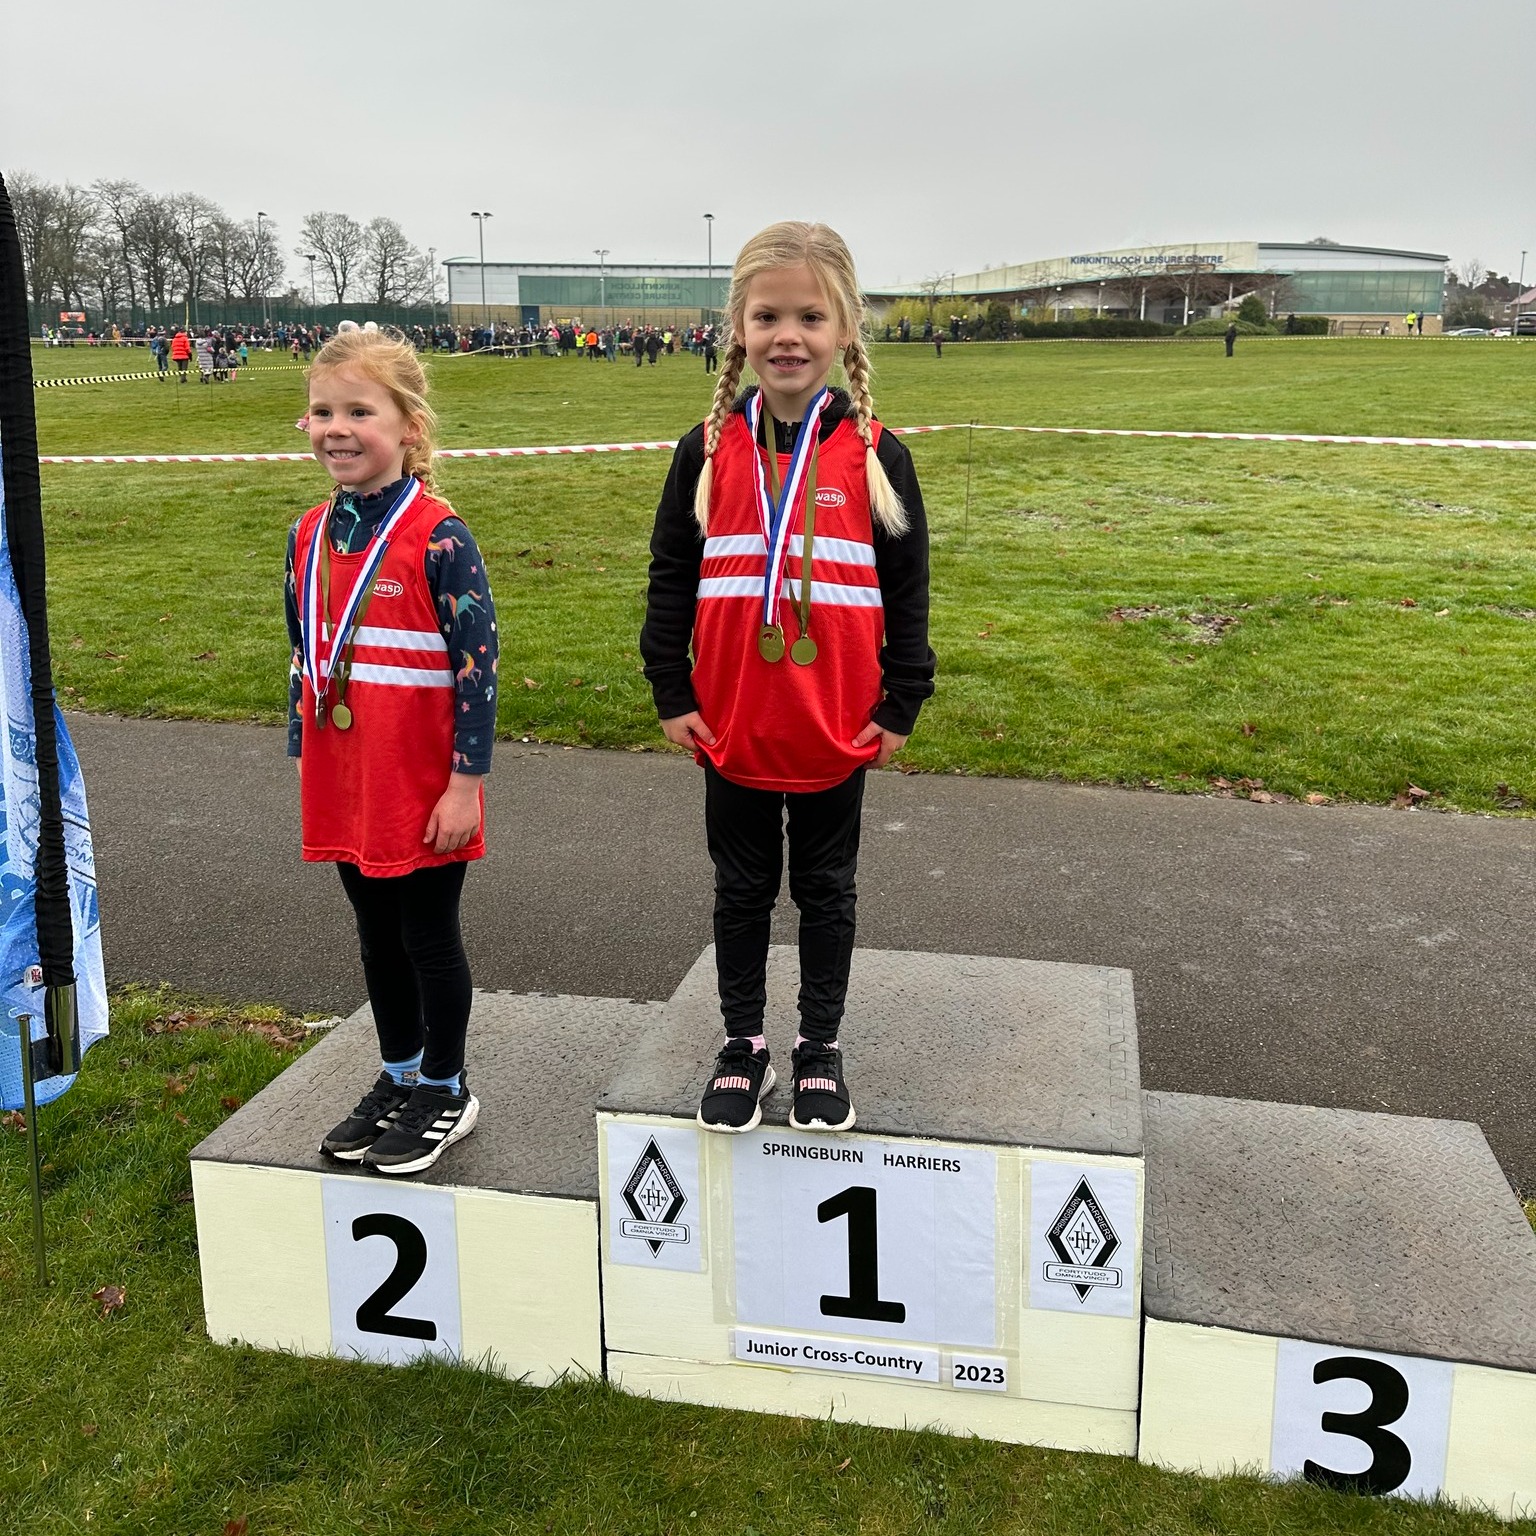 1st Place Lara and 2nd Place Iris on the podium for a Harriers 1-2